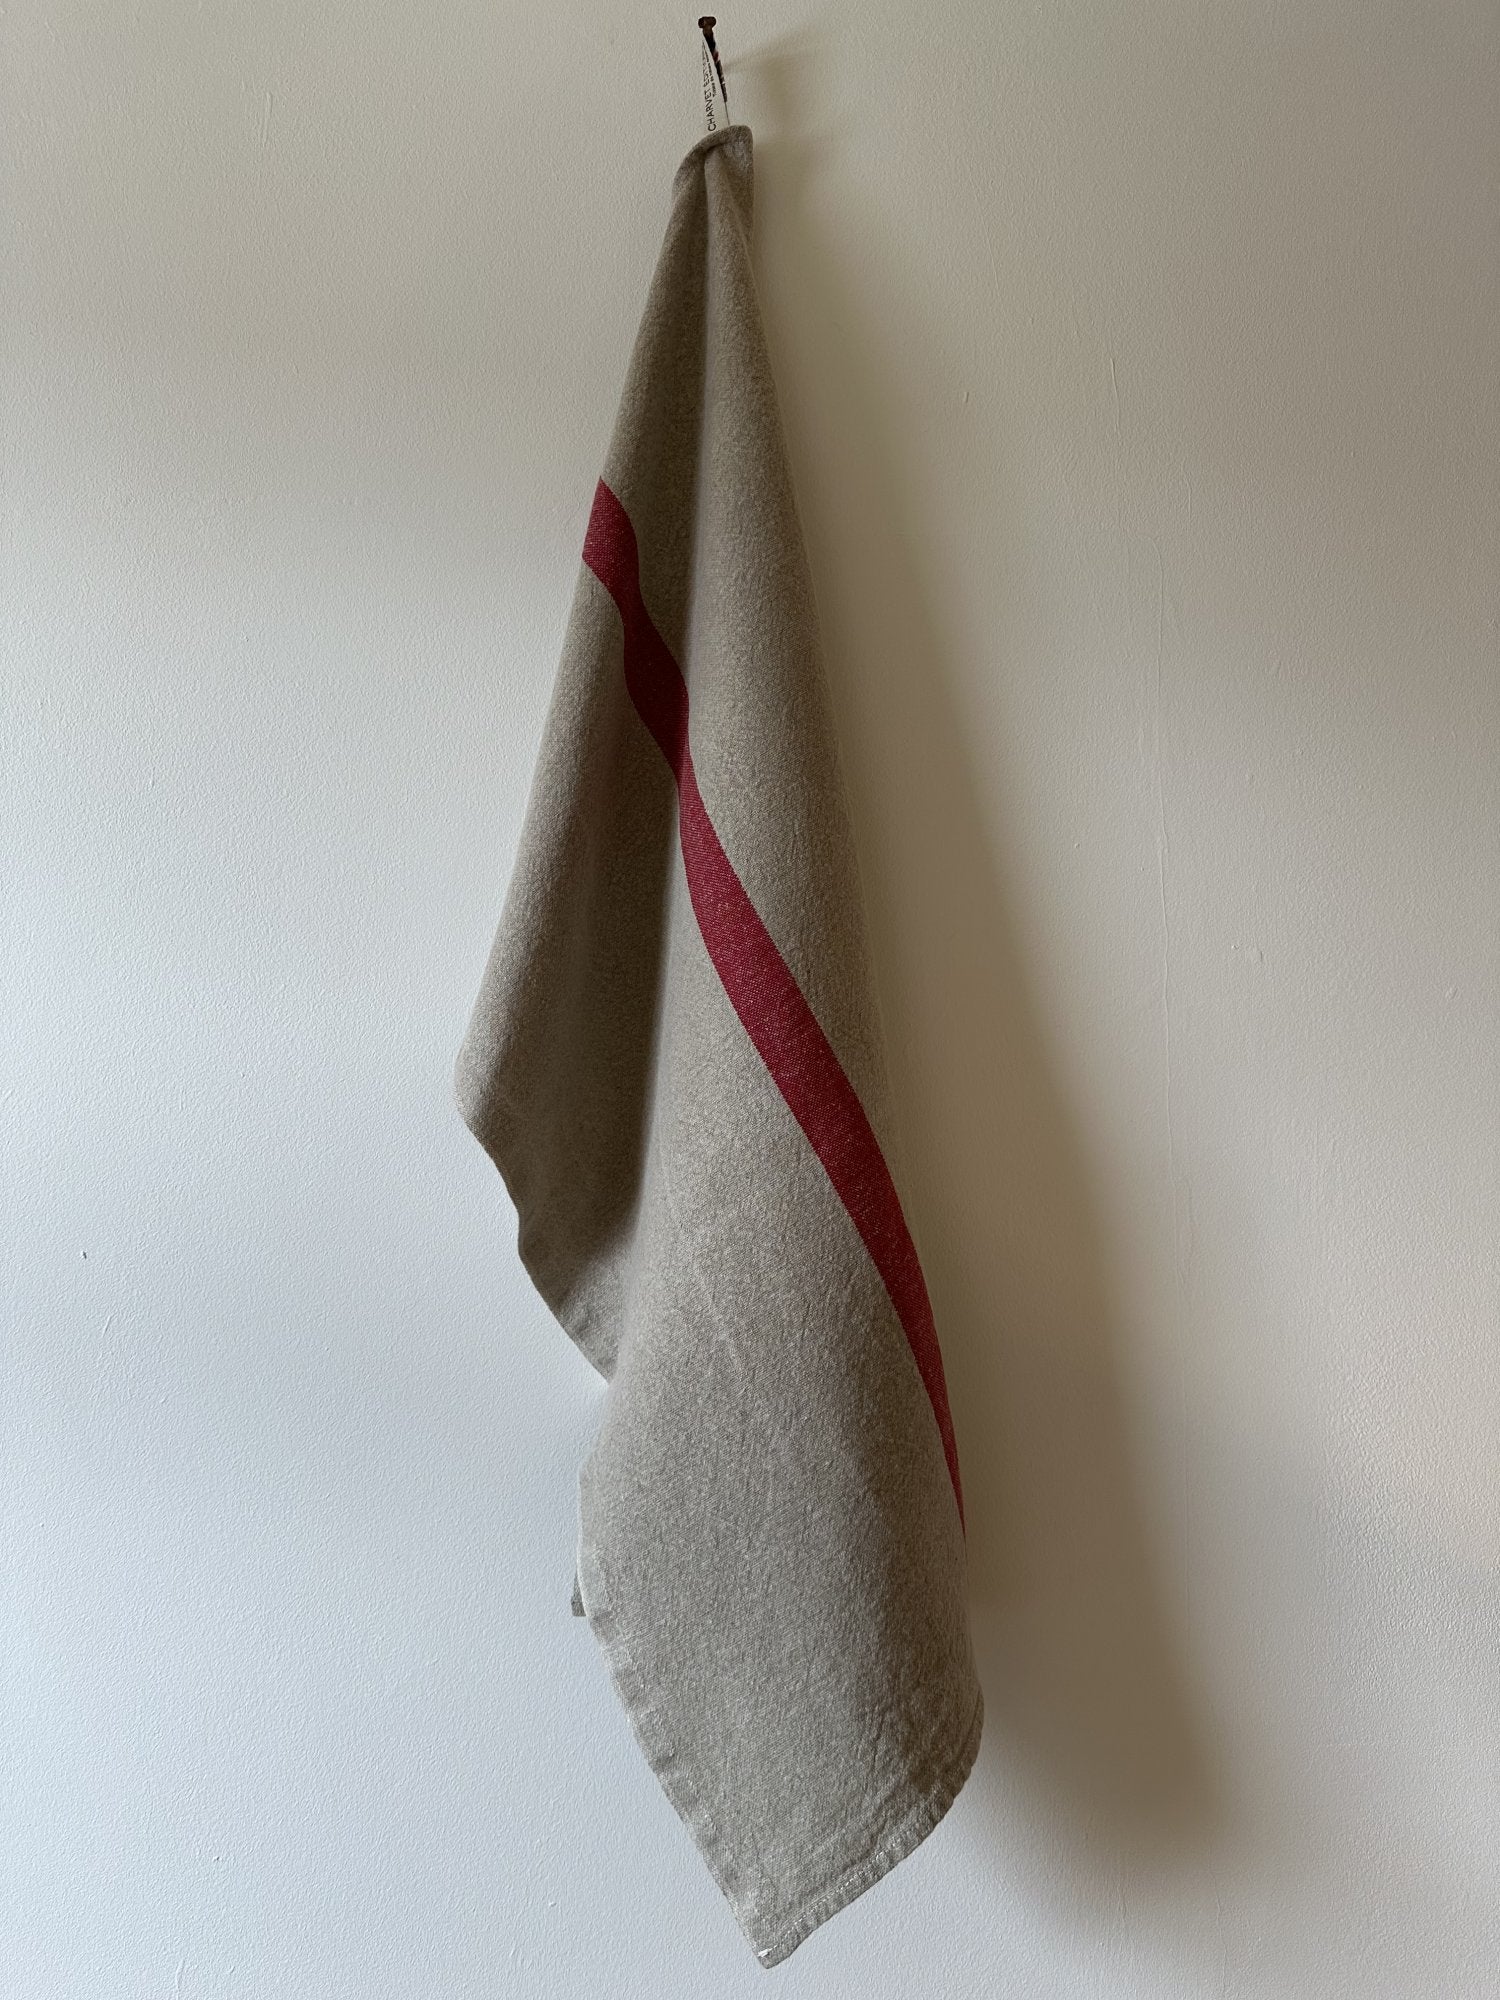 Charvet Editions "Doudou Stripe" (Natural & Red), Natural woven linen tea towel. Made in France.